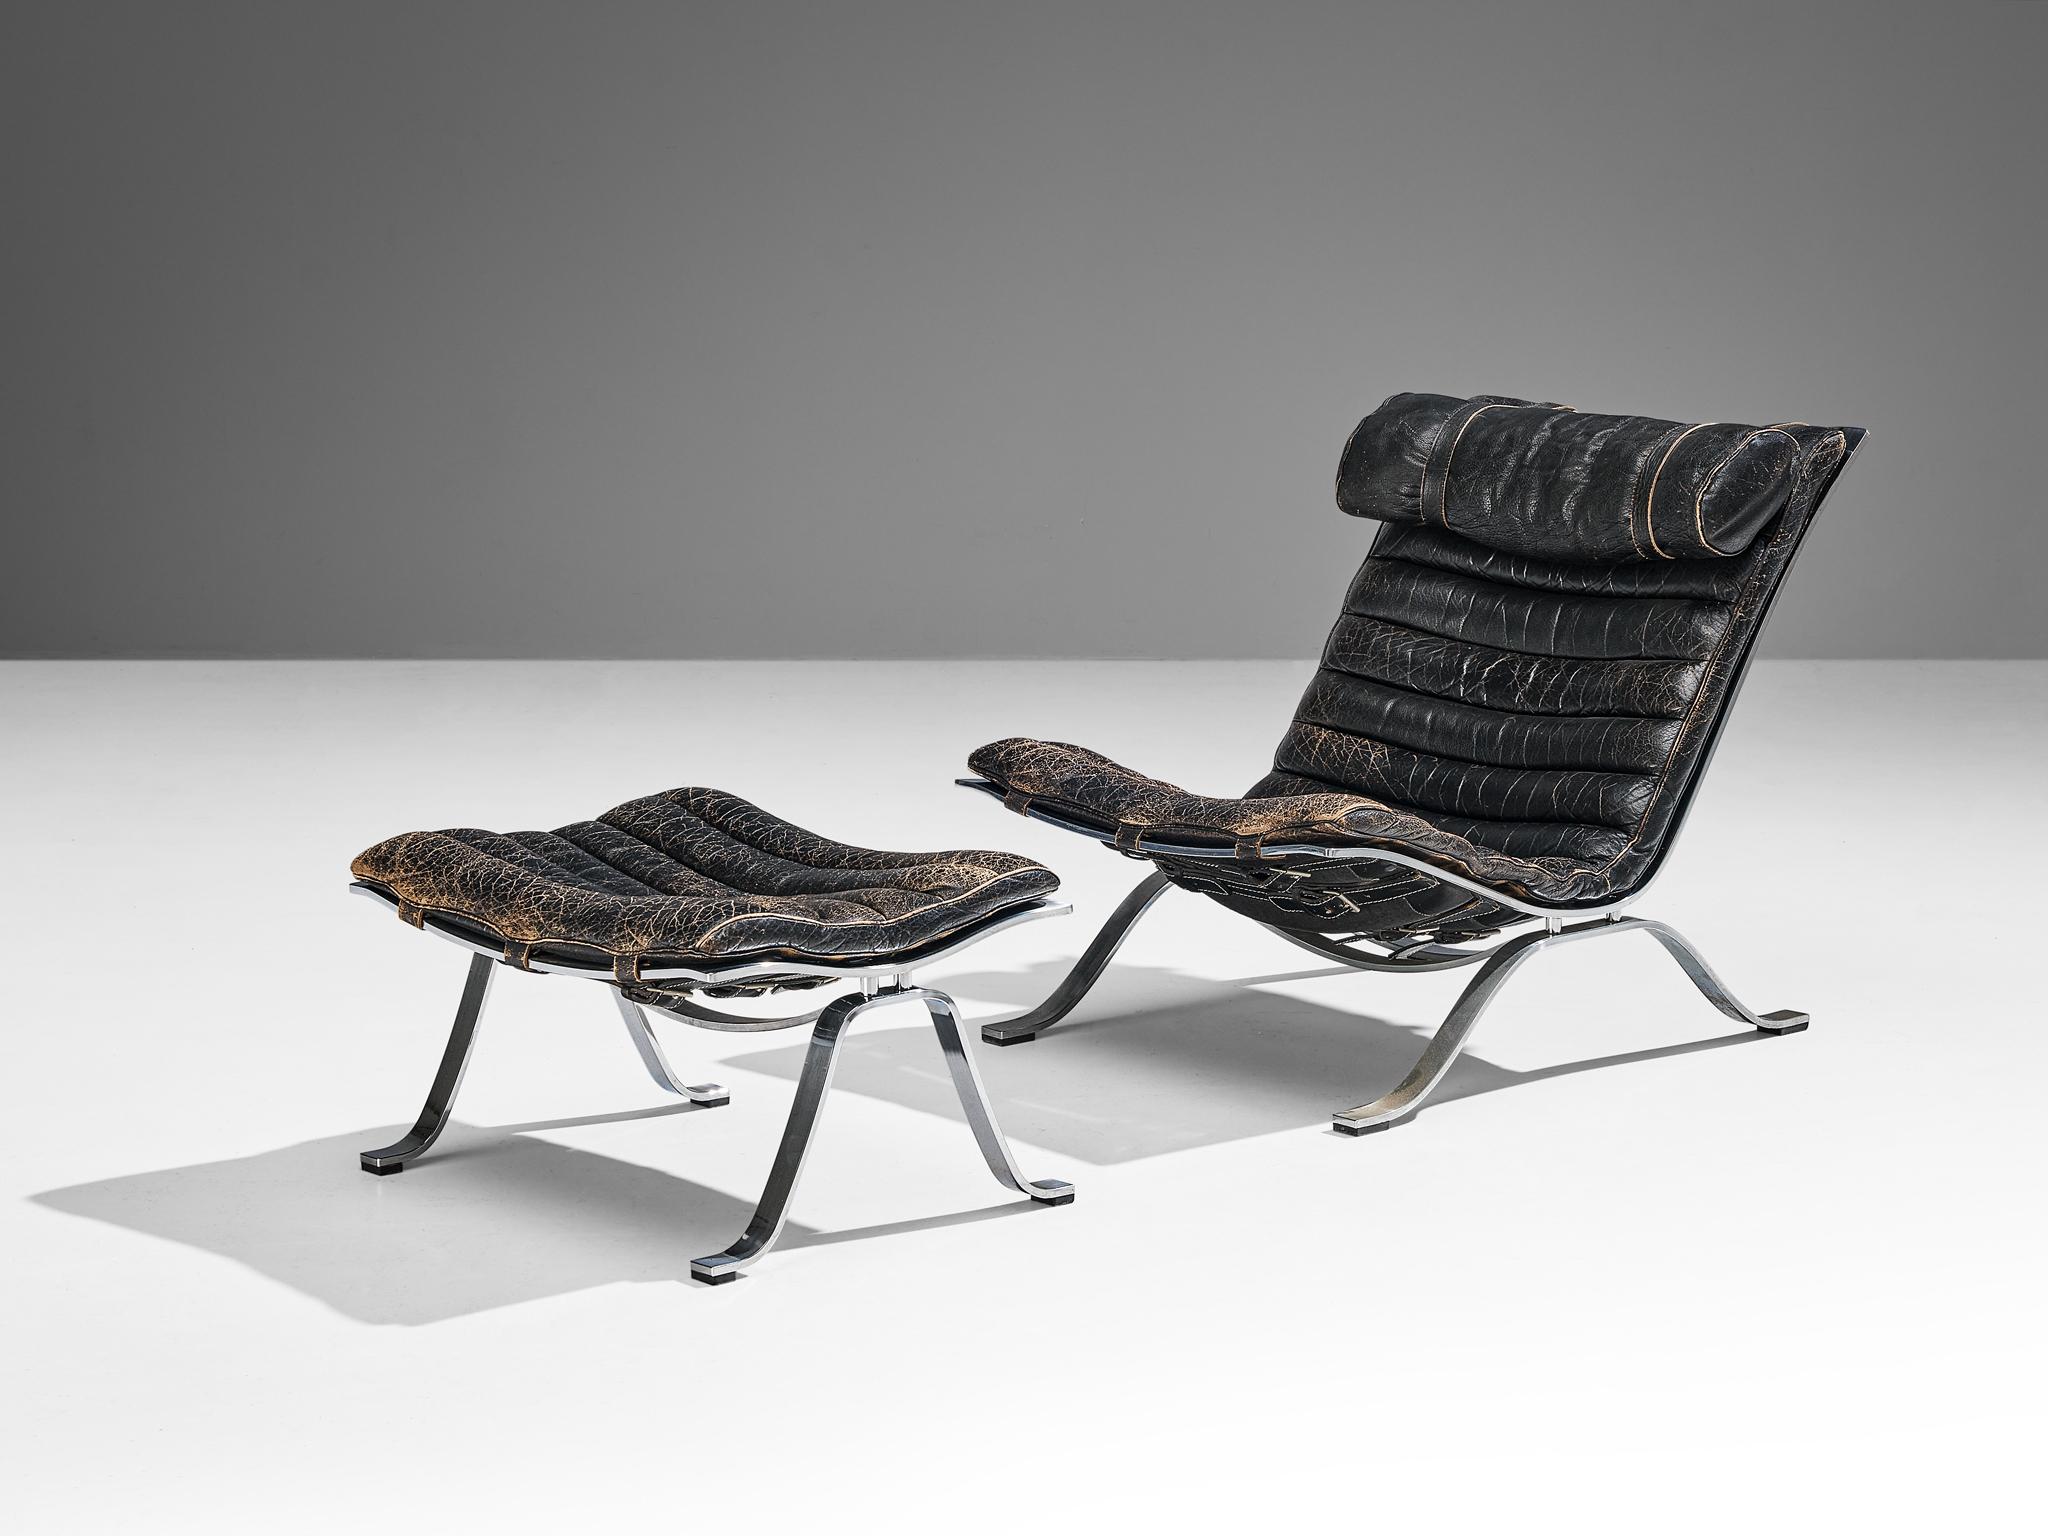 Arne Norell for Norell Møbel AB, 'Ari' lounge chair and ottoman, patinated black leather, chrome-plated steel, Denmark, 1966

The lounge chair and accompanying ottoman, known as the 'Ari' model, were designed by the esteemed Arne Norell (1917-1971)